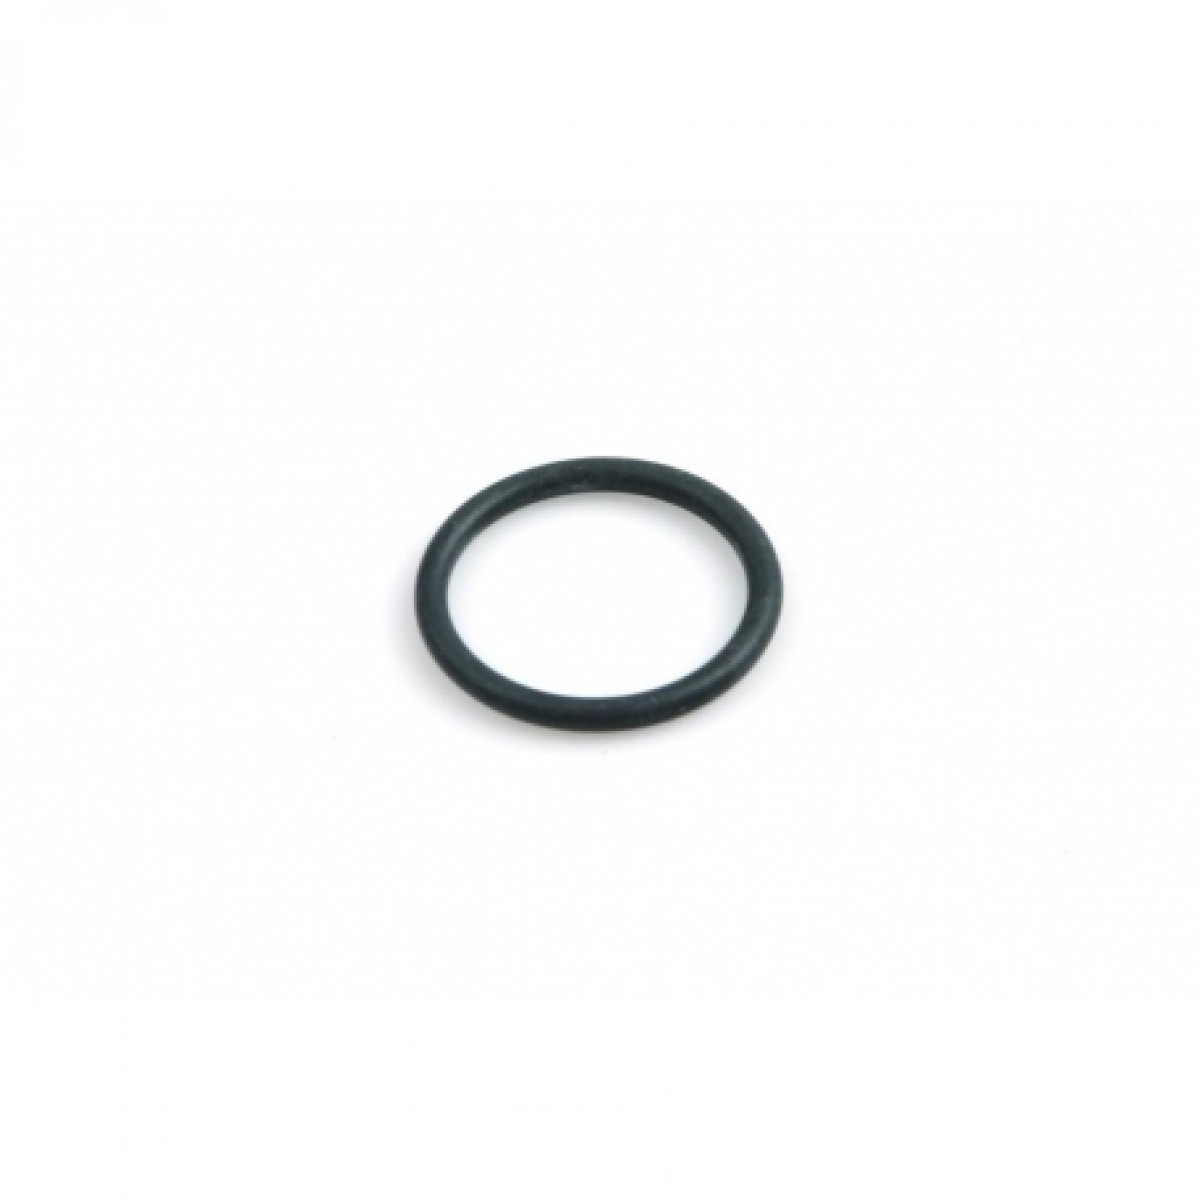 Picture of Birel seal o-ring 2118 d.i. 29,87x1,78 epdm